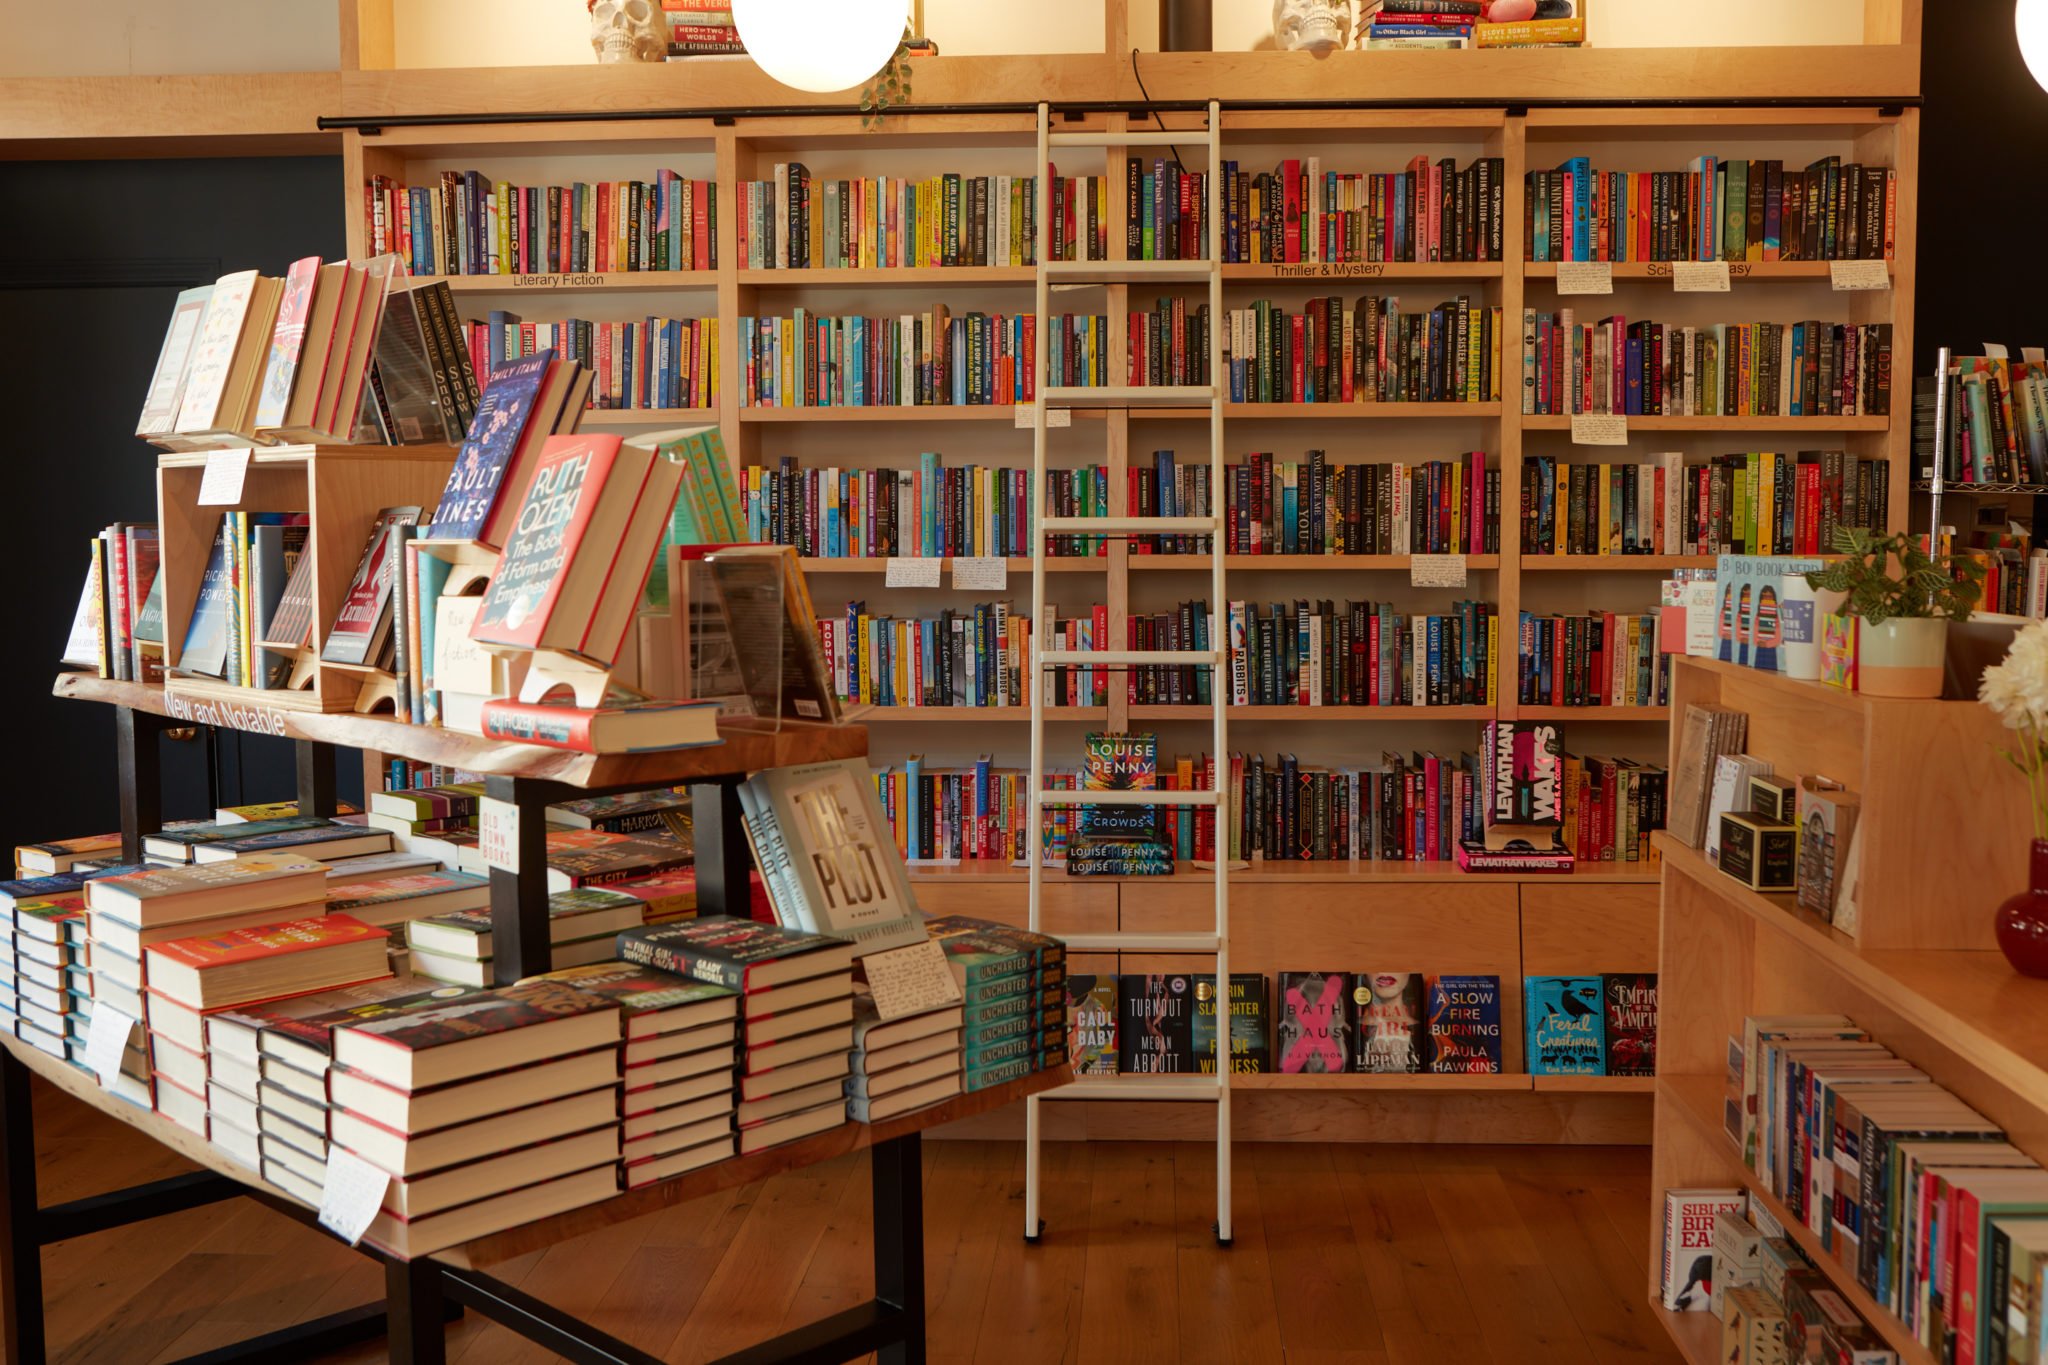 21 Independent Bookstores to Browse in the DC Area